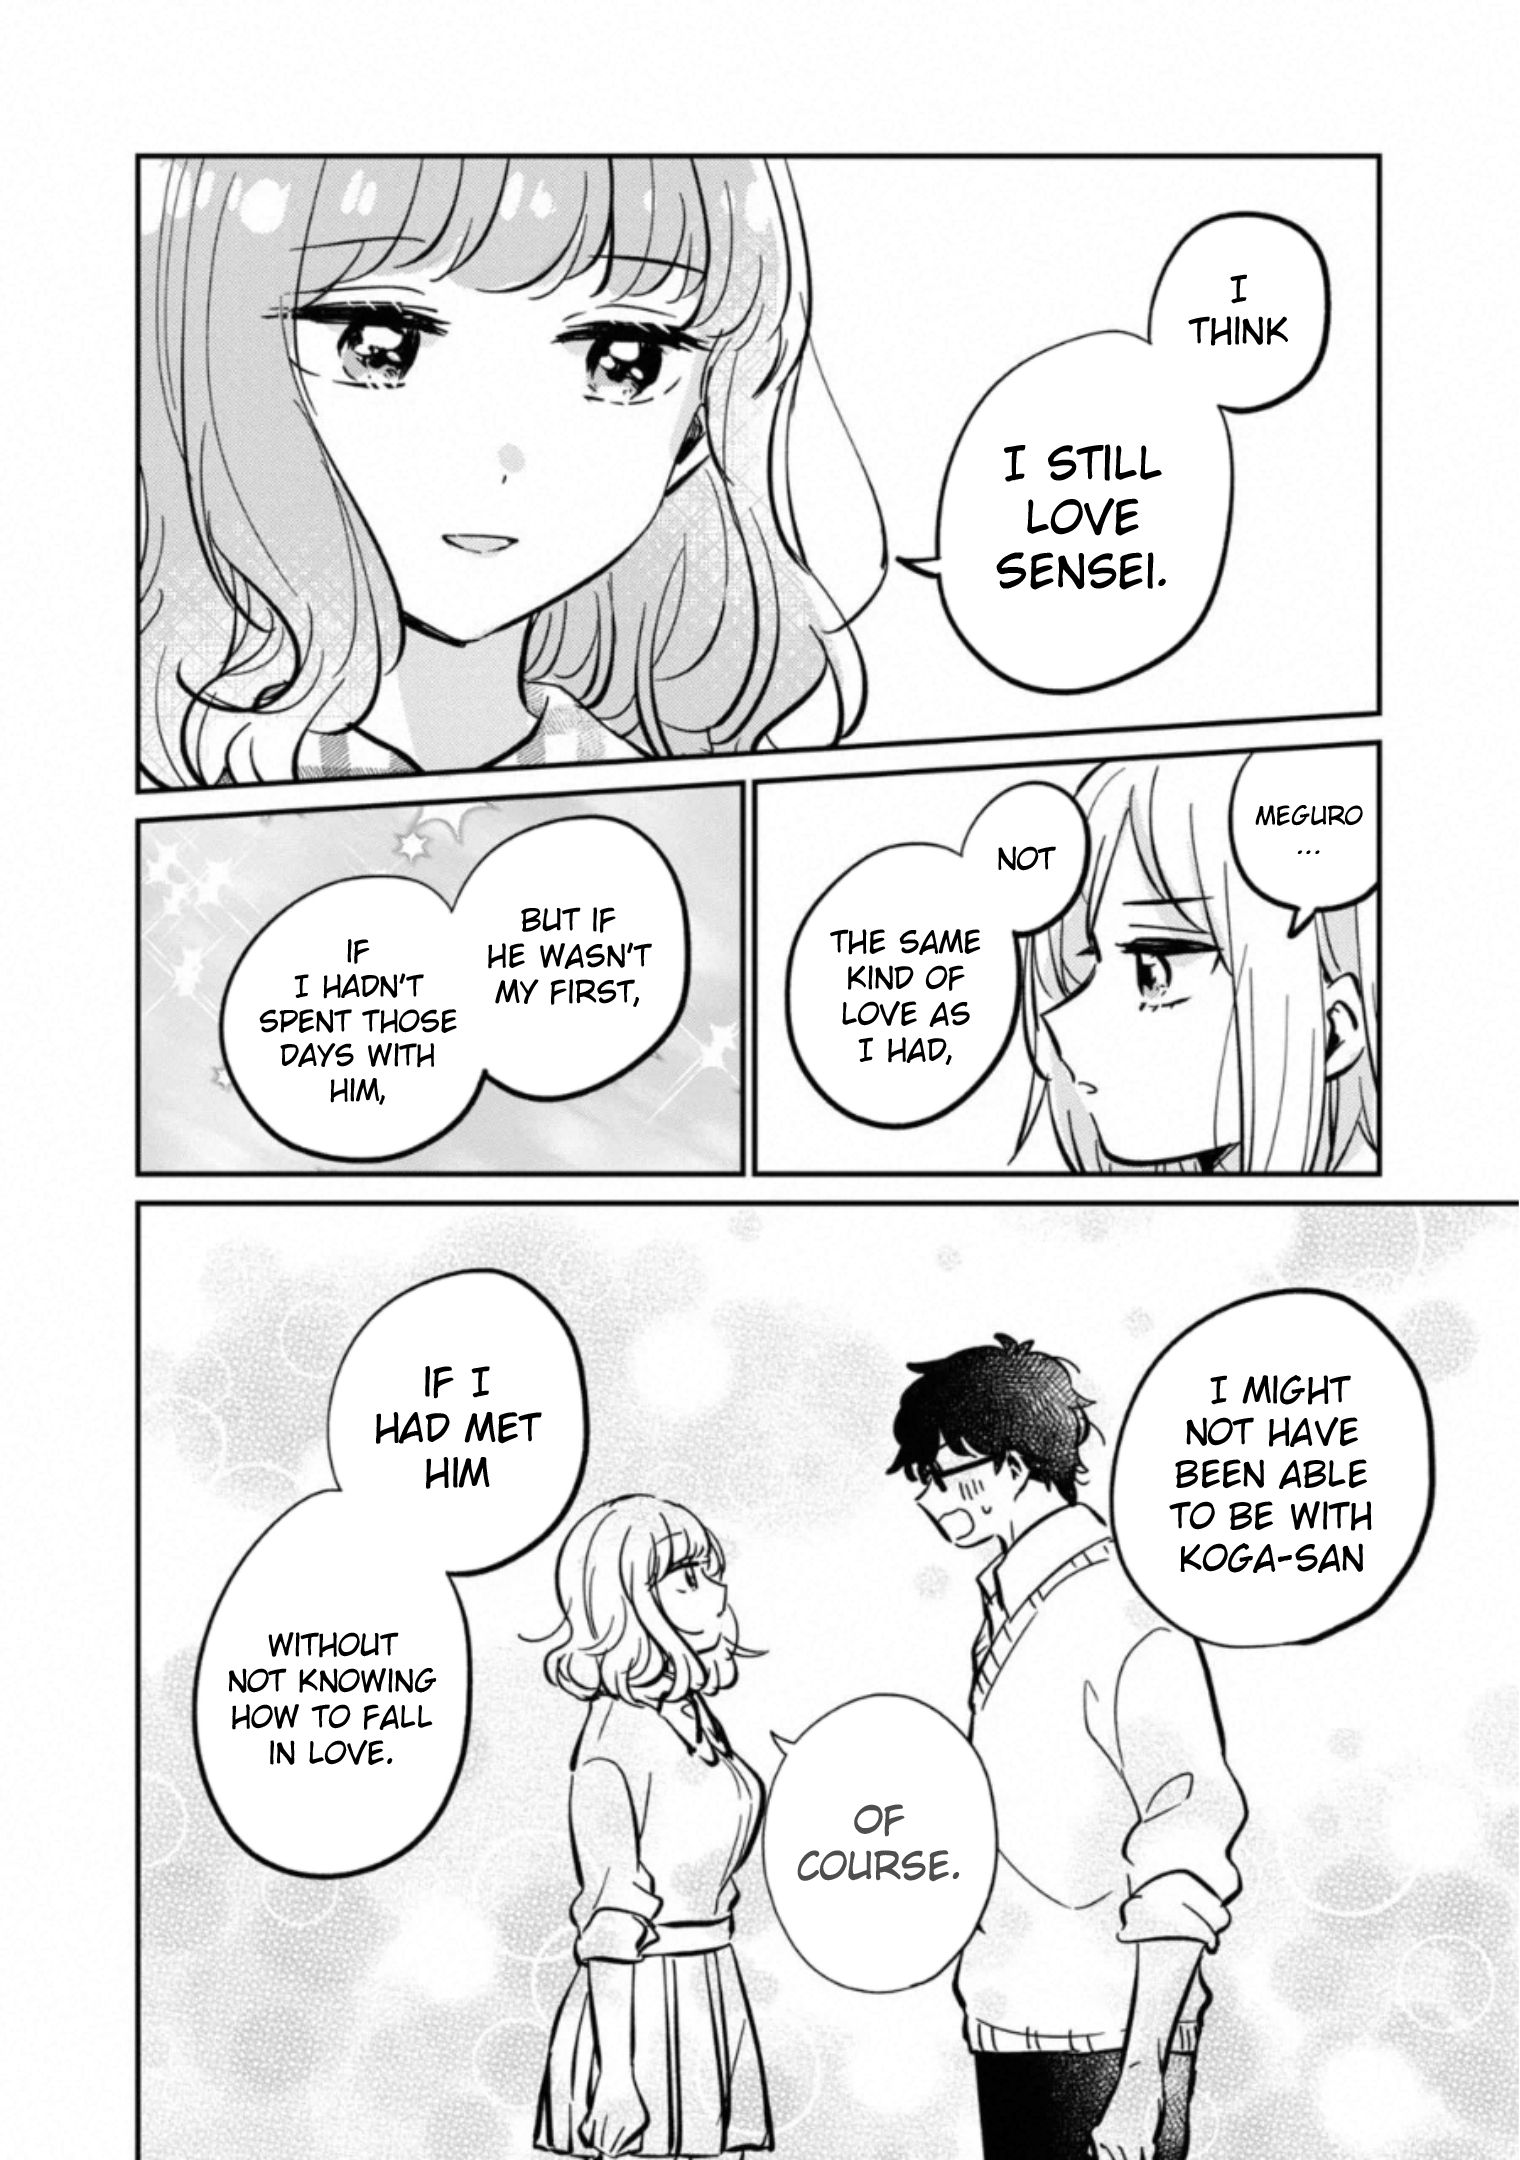 It's Not Meguro-san's First Time chapter 30.5 page 13